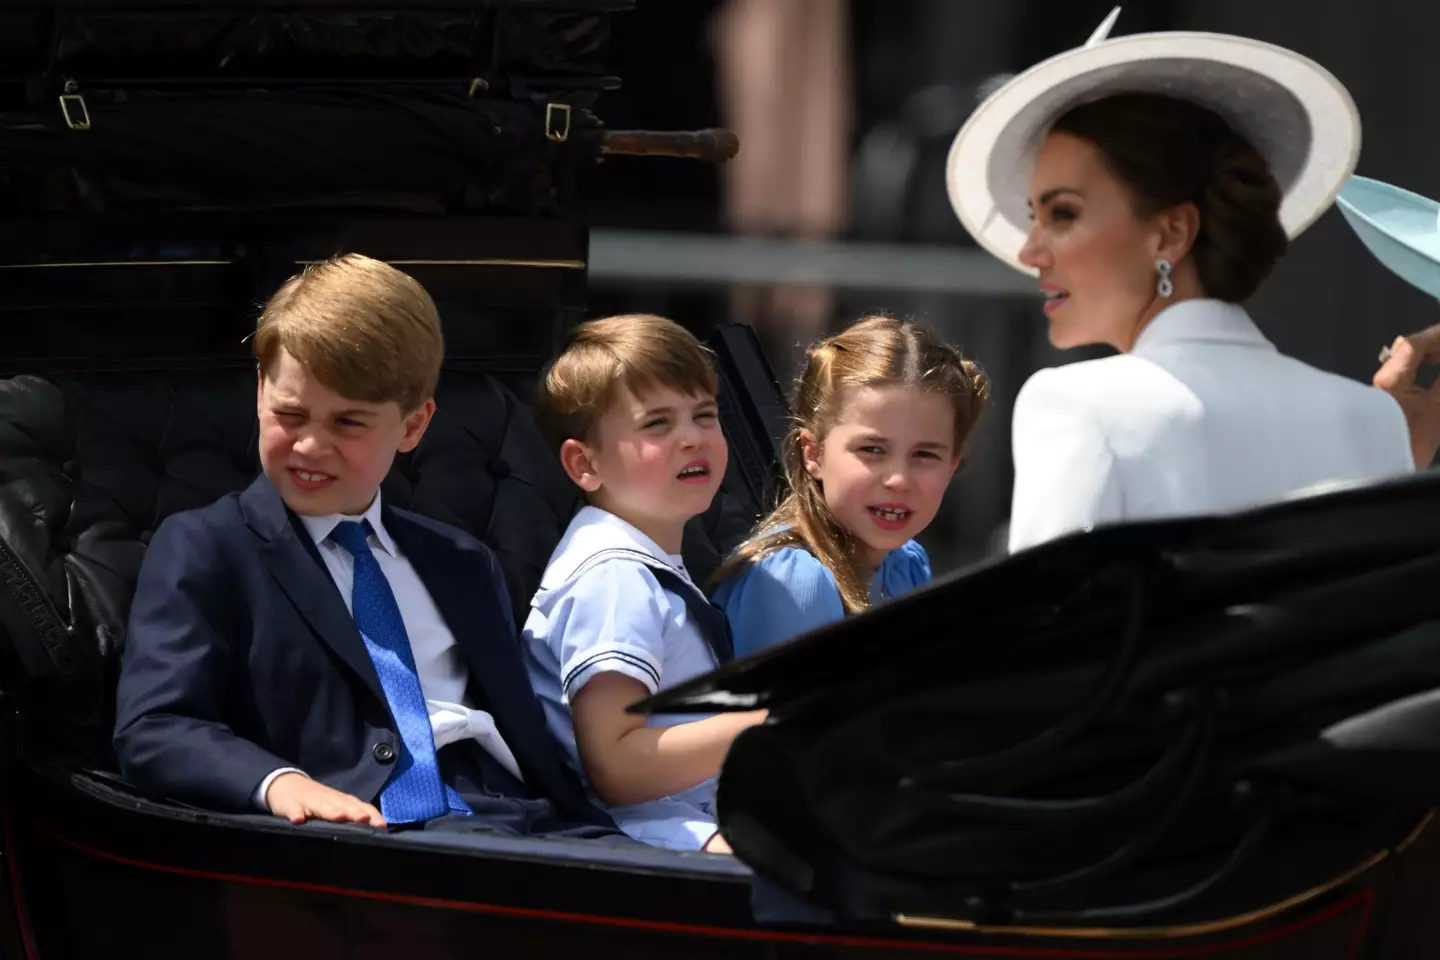 The siblings sat next to each other beside their older brother Prince George, eight, across from their mother Kate.